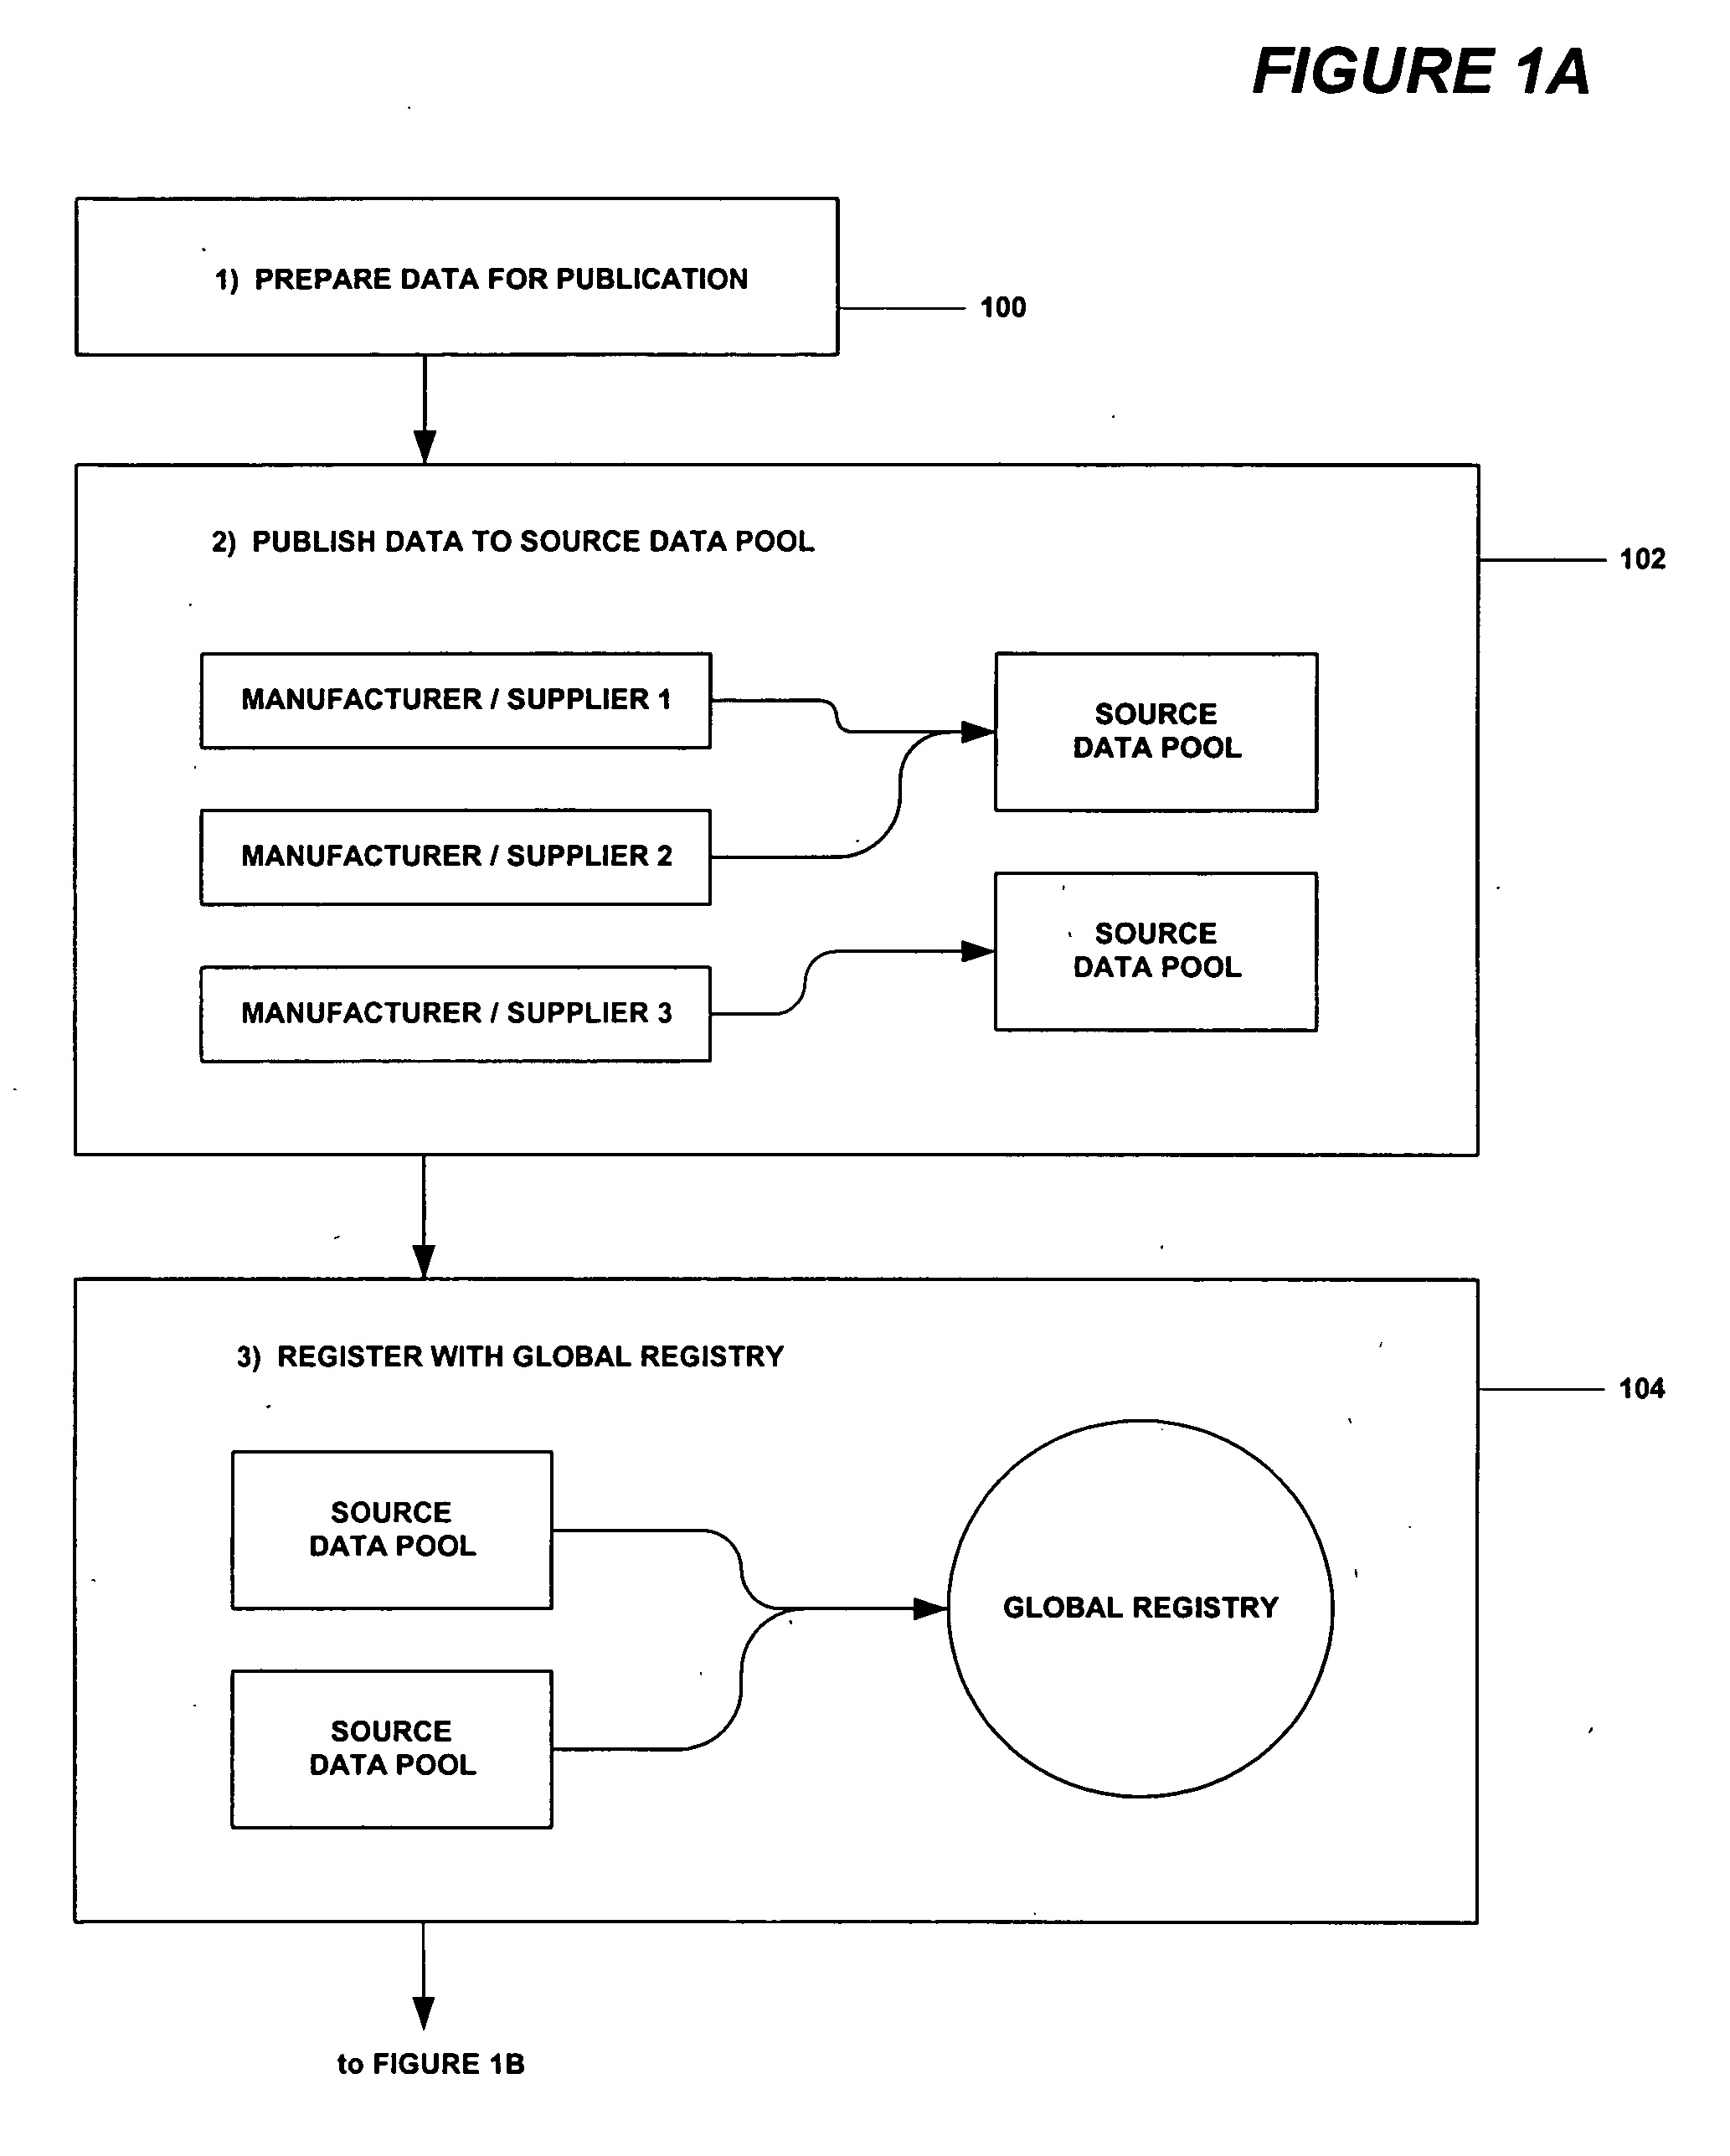 Accelerated system and methods for synchronizing, managing and publishing business information